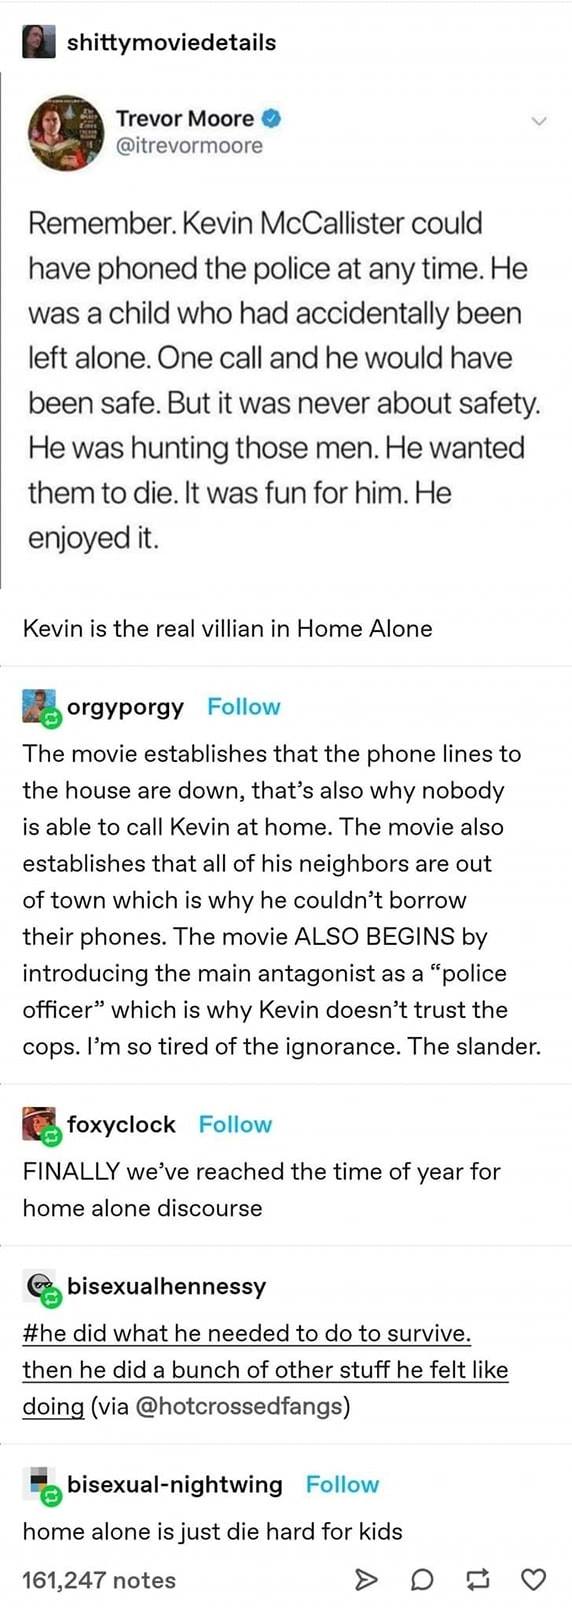 An Analysis of Home Alone